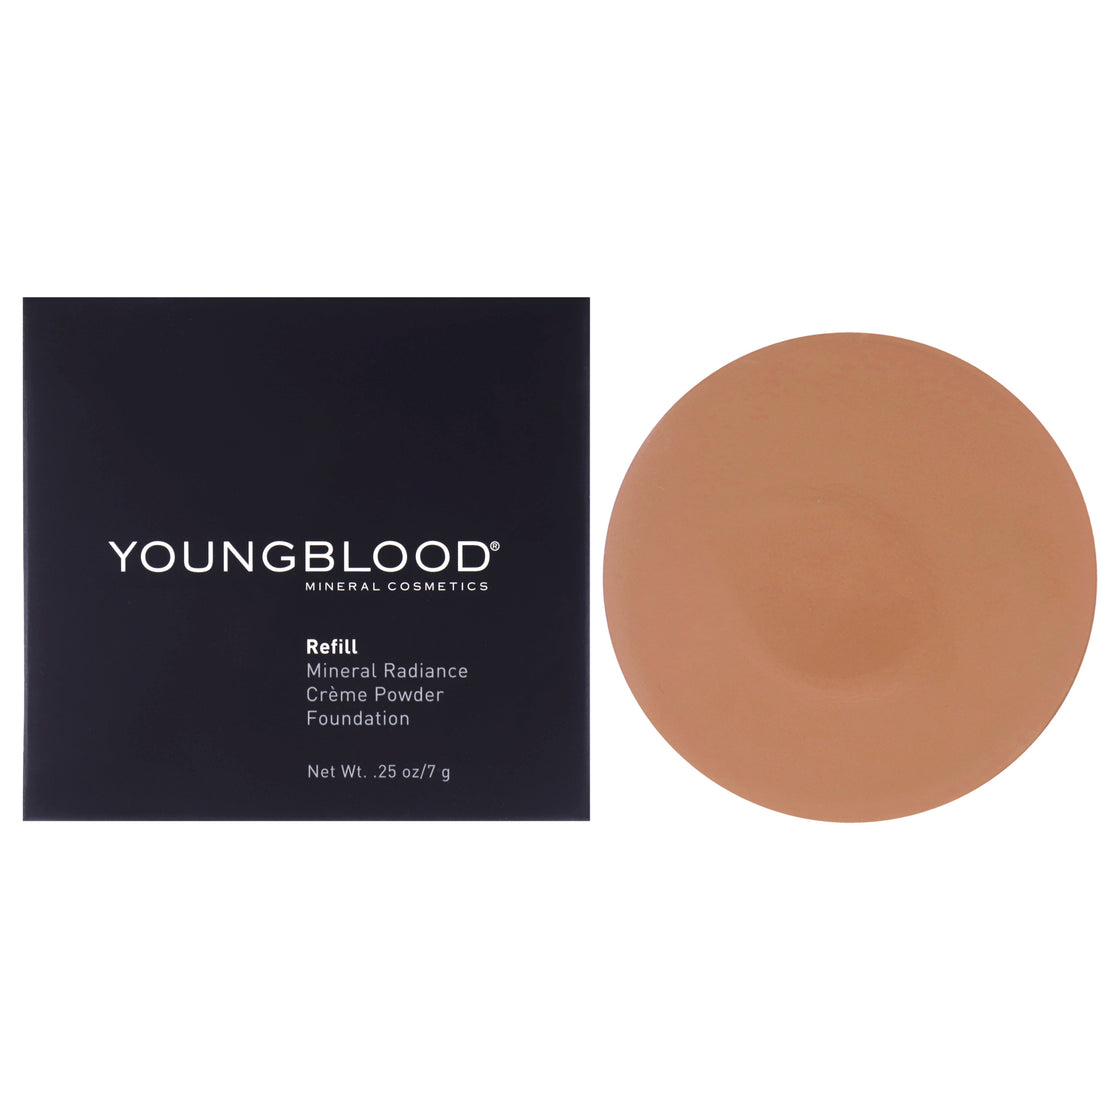 Mineral Radiance Creme Powder Foundation - Toffee by Youngblood for Women - 0.25 oz Foundation (Refill)